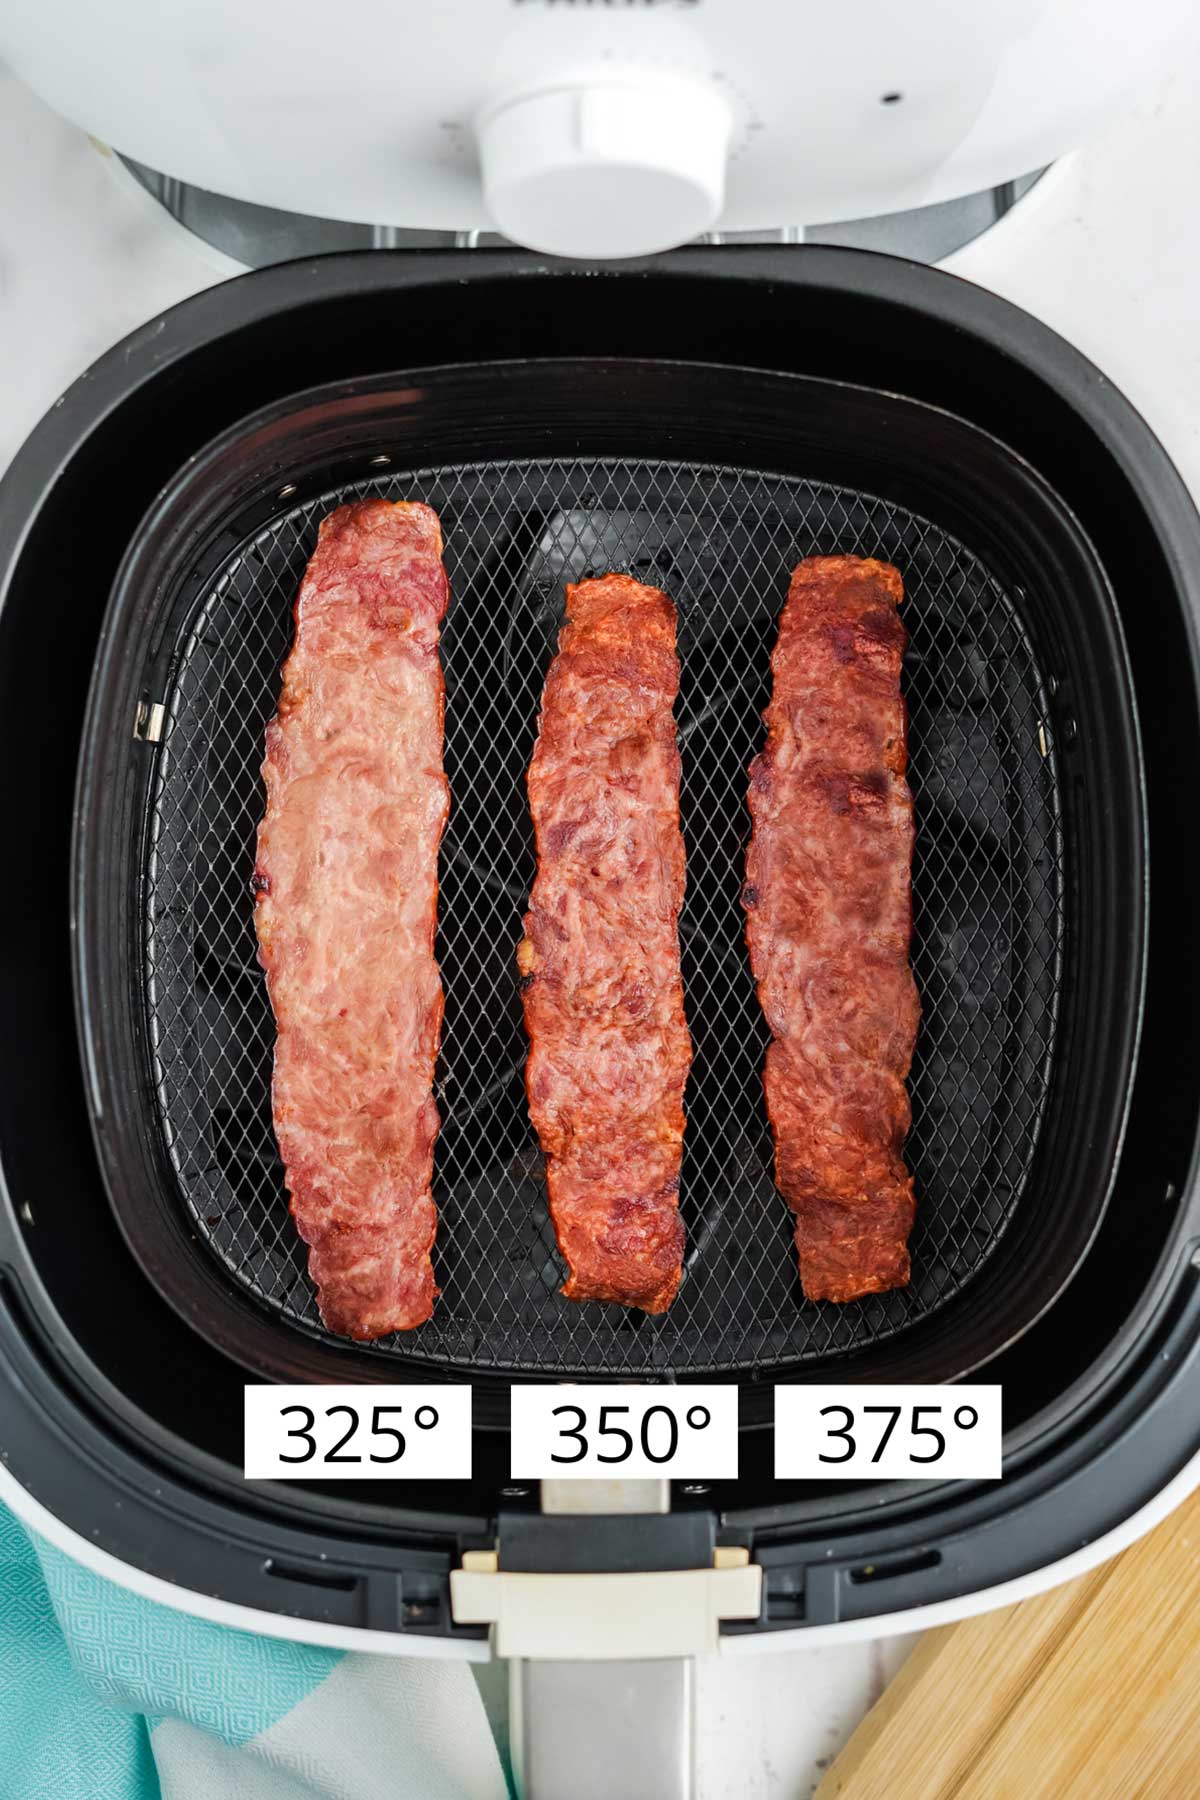 Three strips of turkey bacon showing the outcomes of cooking at different temperatures.